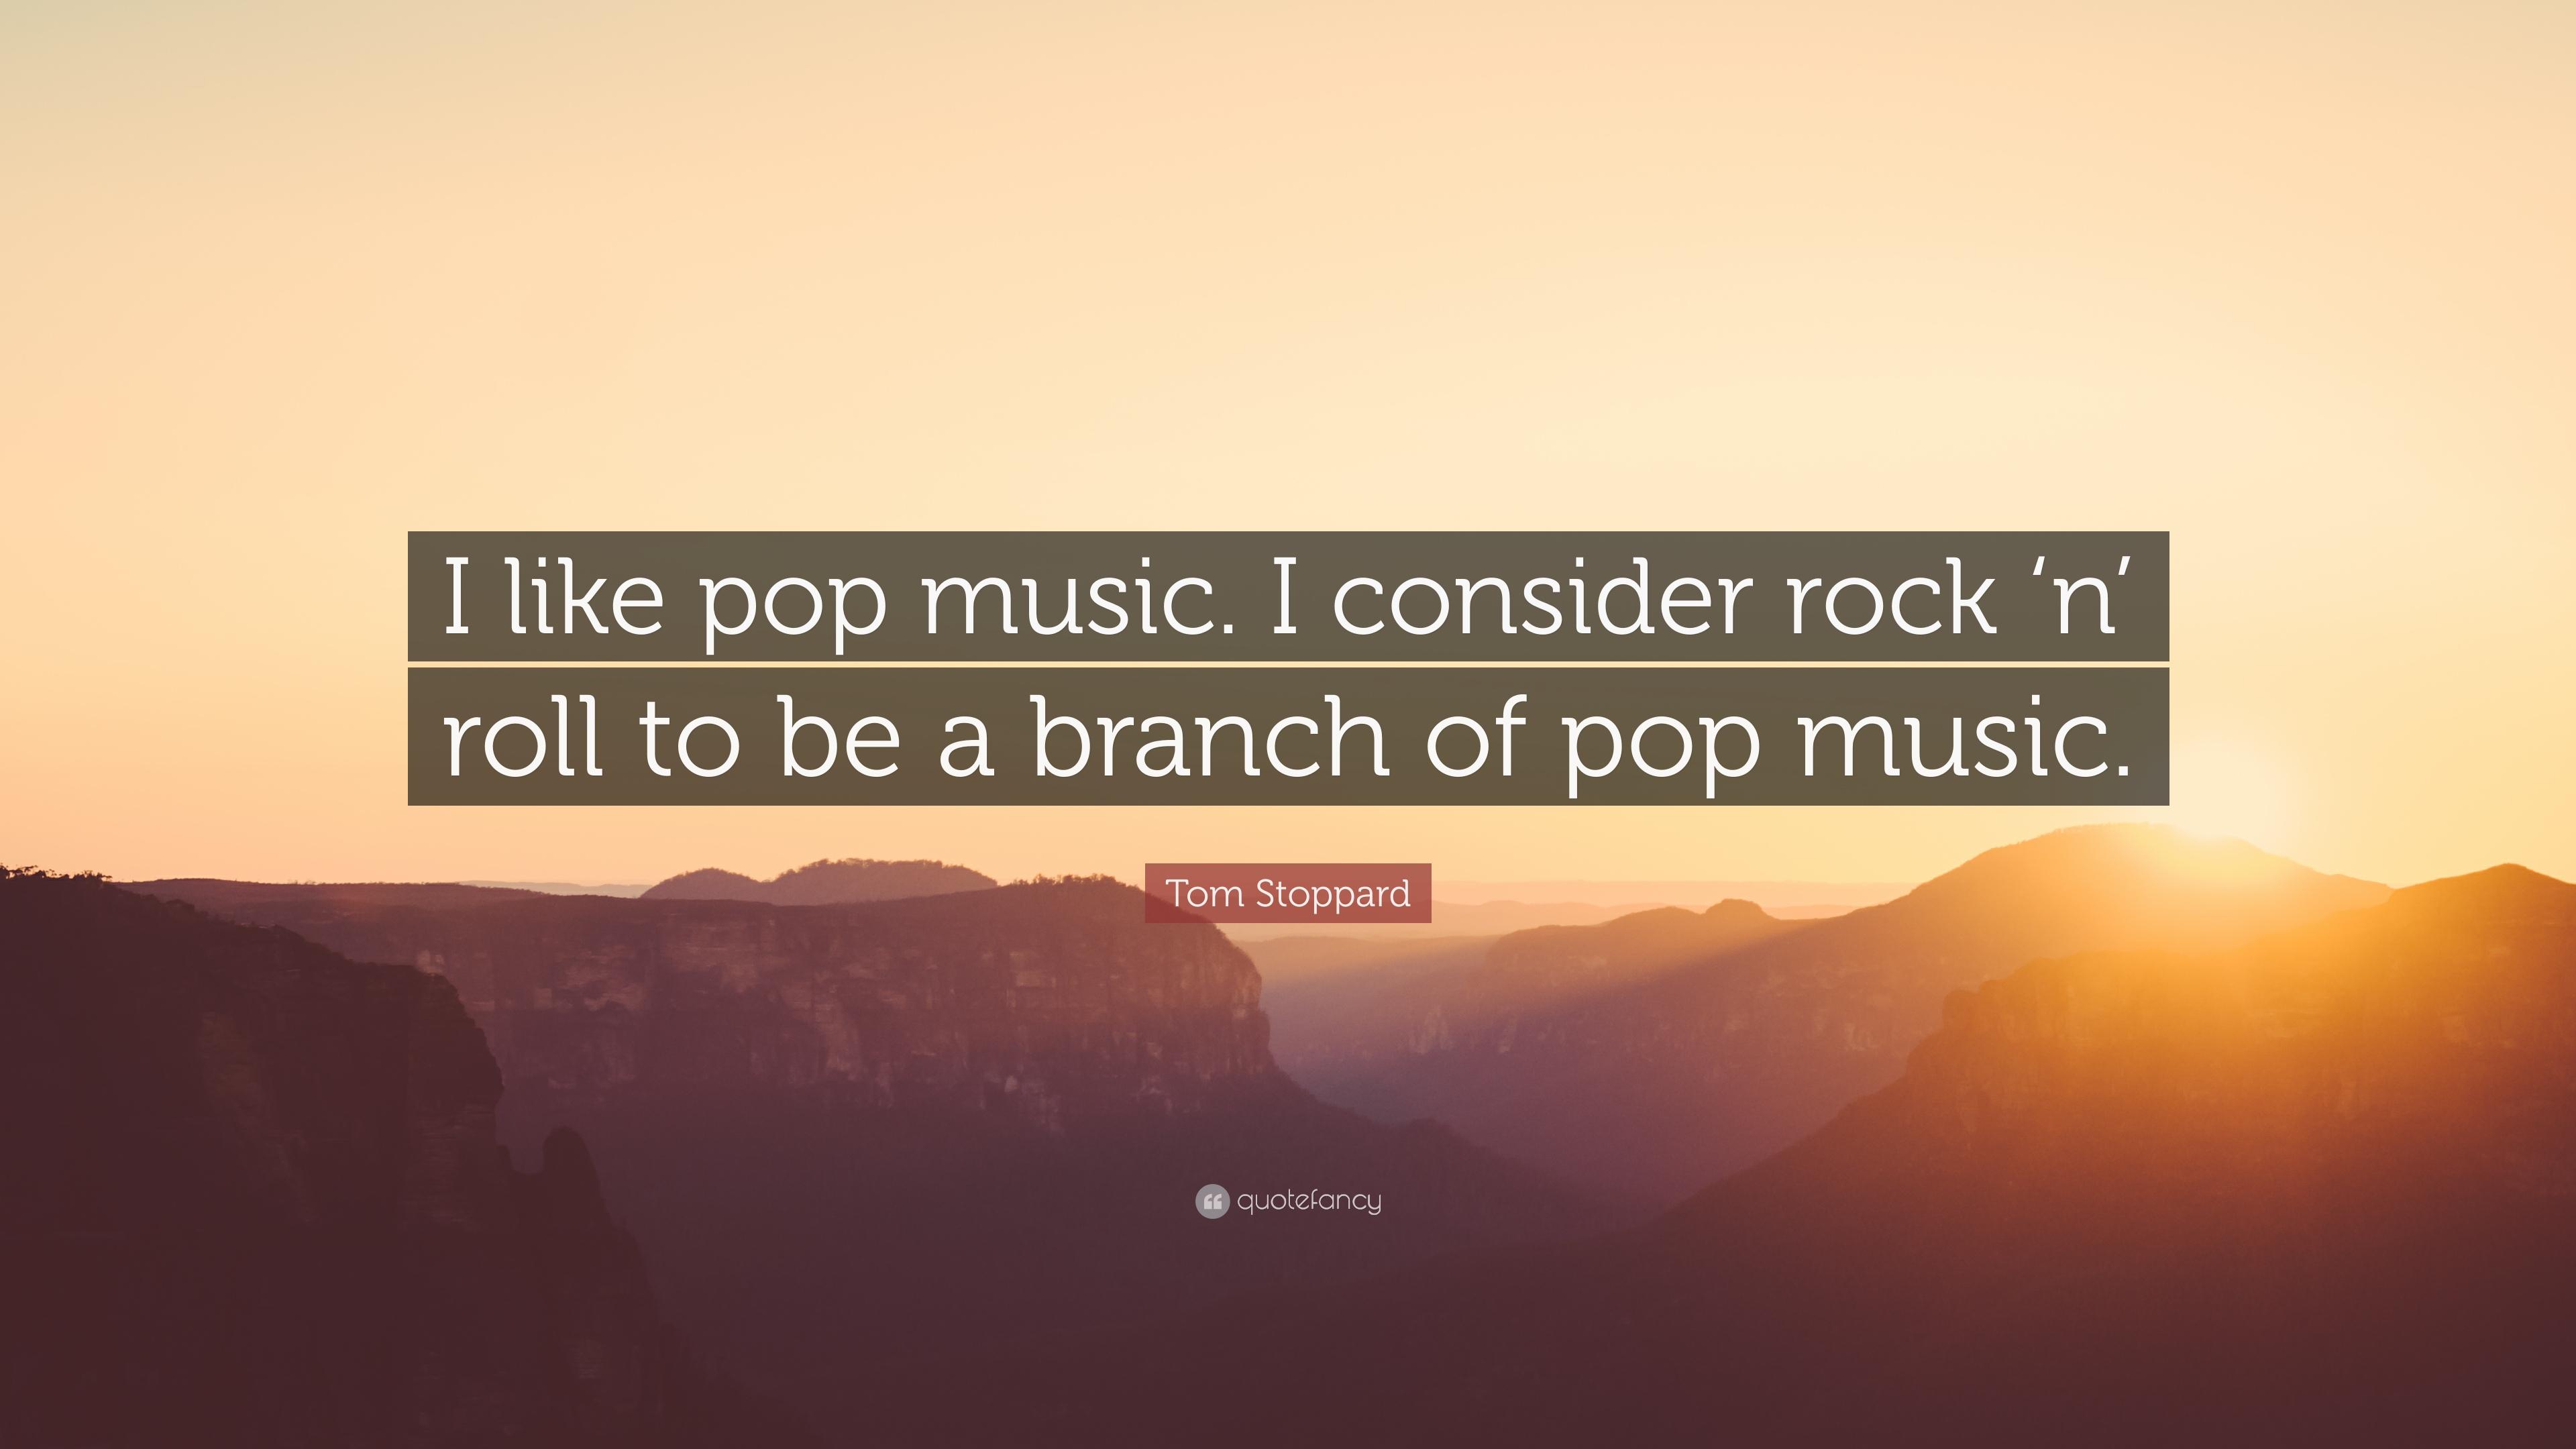 Tom Stoppard Quote: “I like pop music. I consider rock 'n' roll to